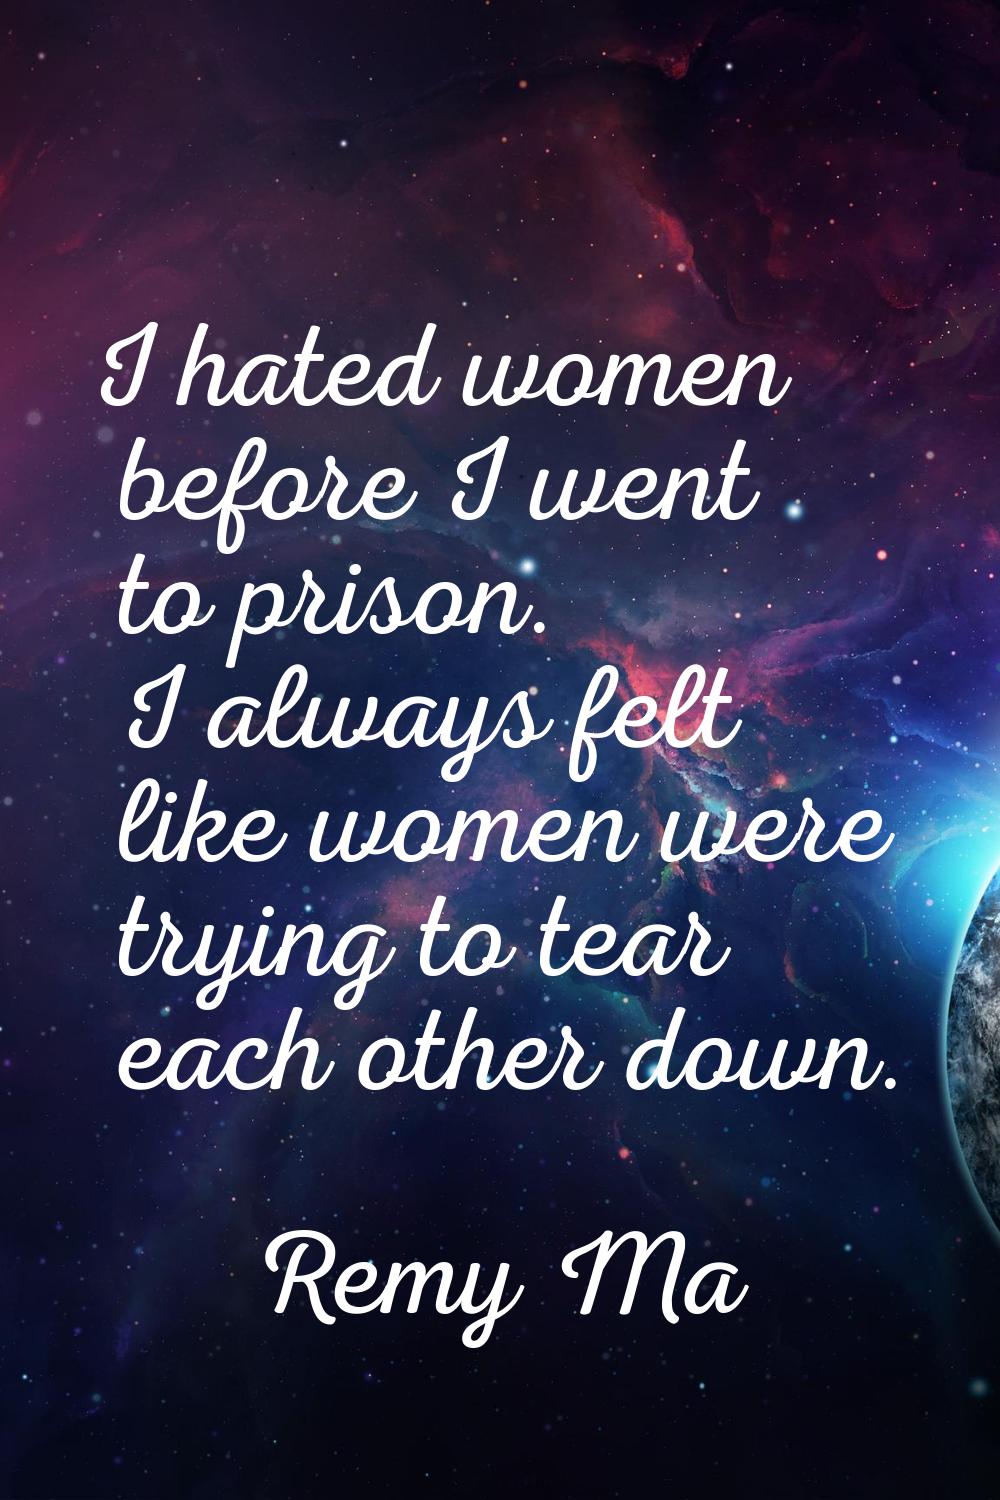 I hated women before I went to prison. I always felt like women were trying to tear each other down